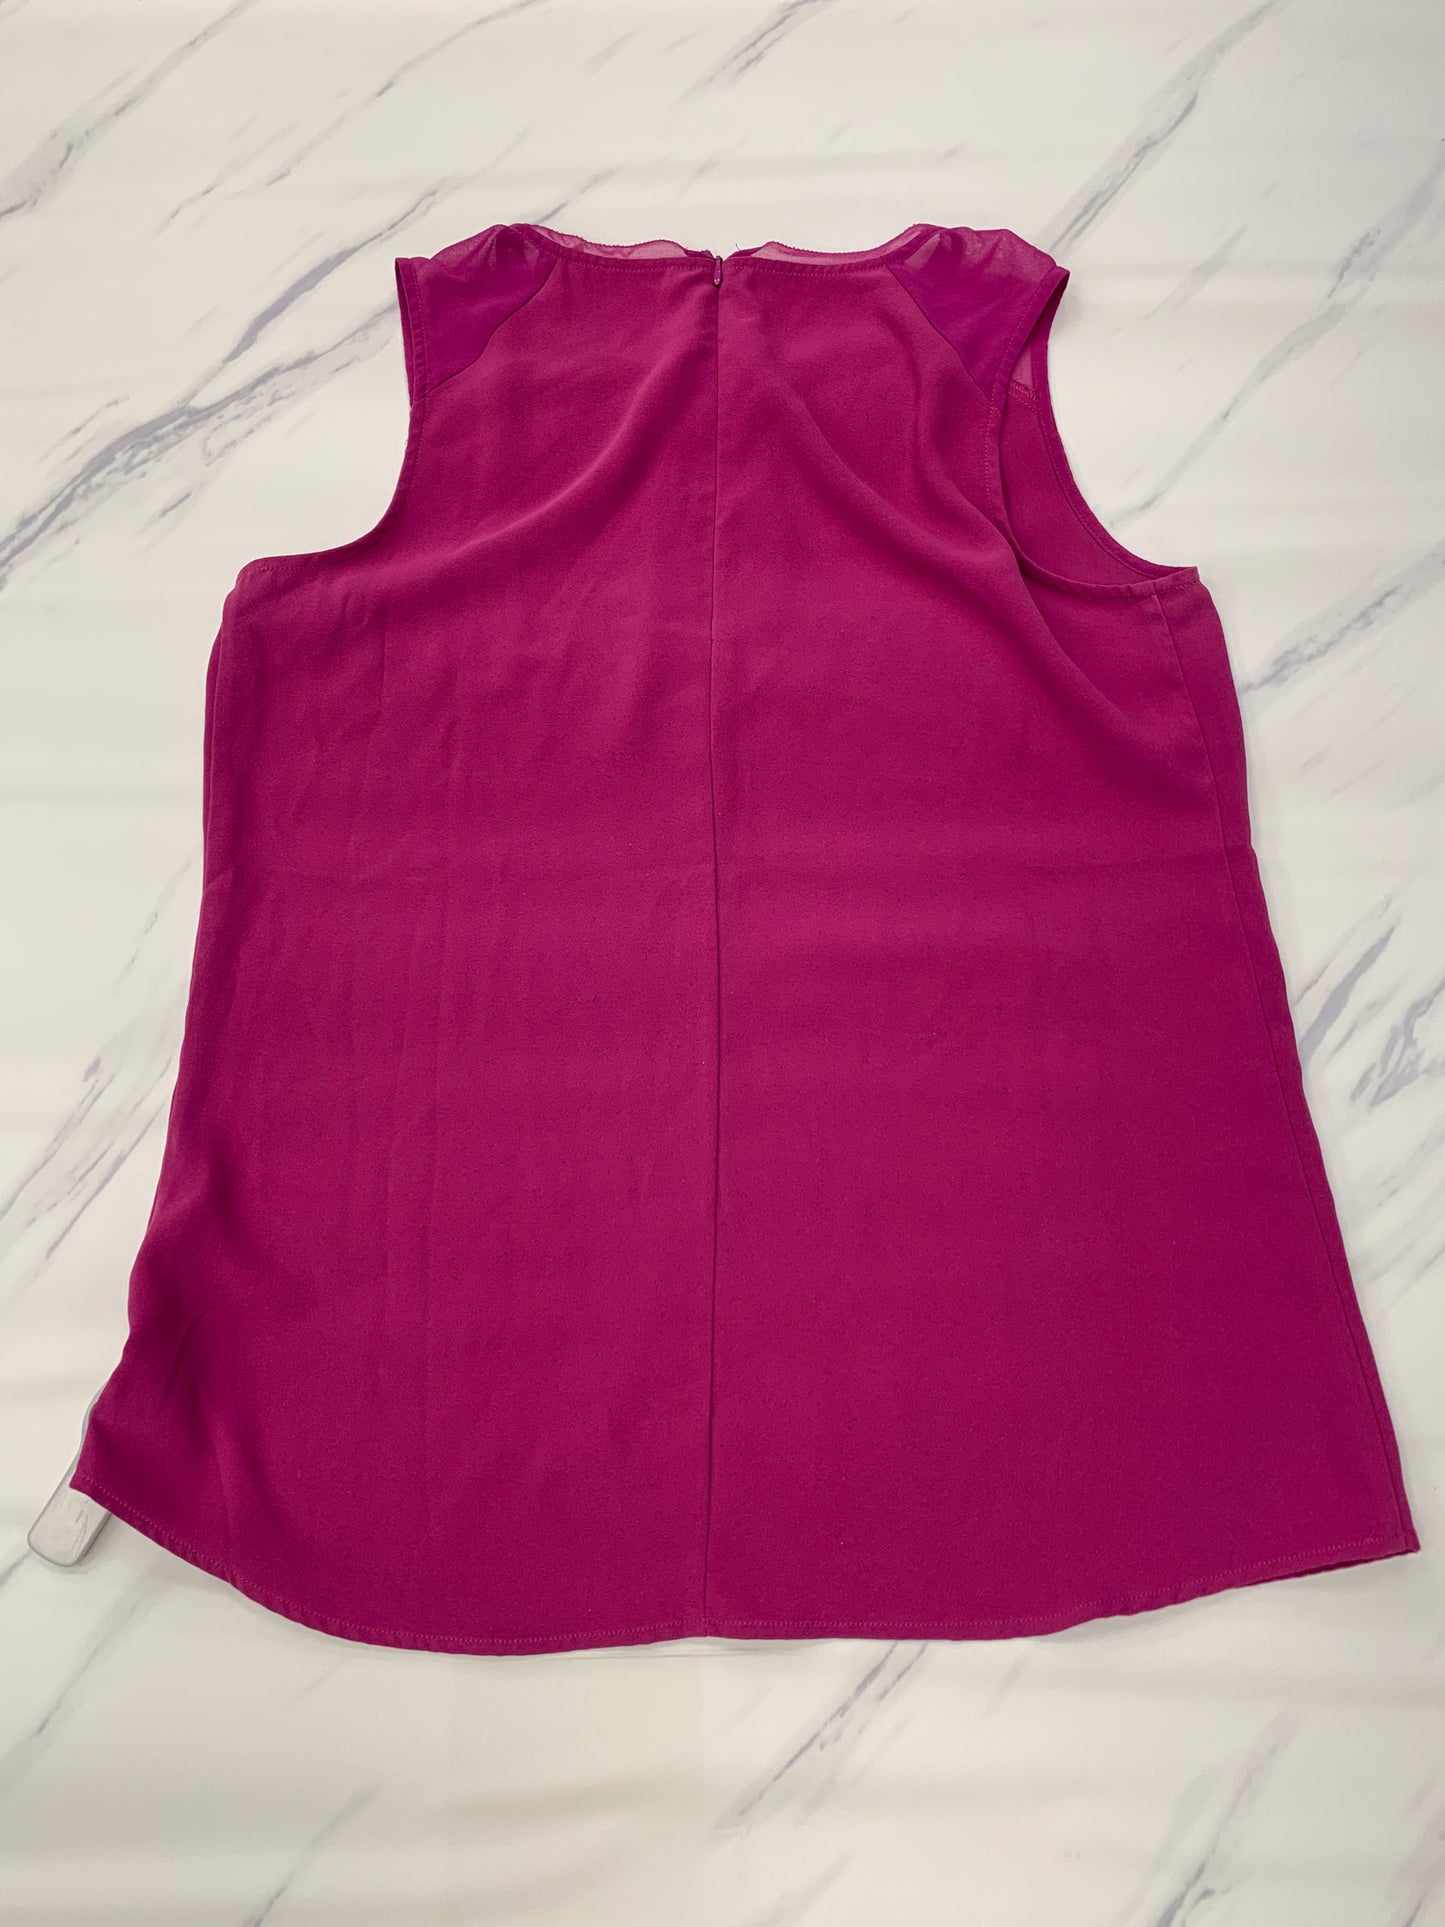 Top Sleeveless Designer By Soft Surroundings  Size: S